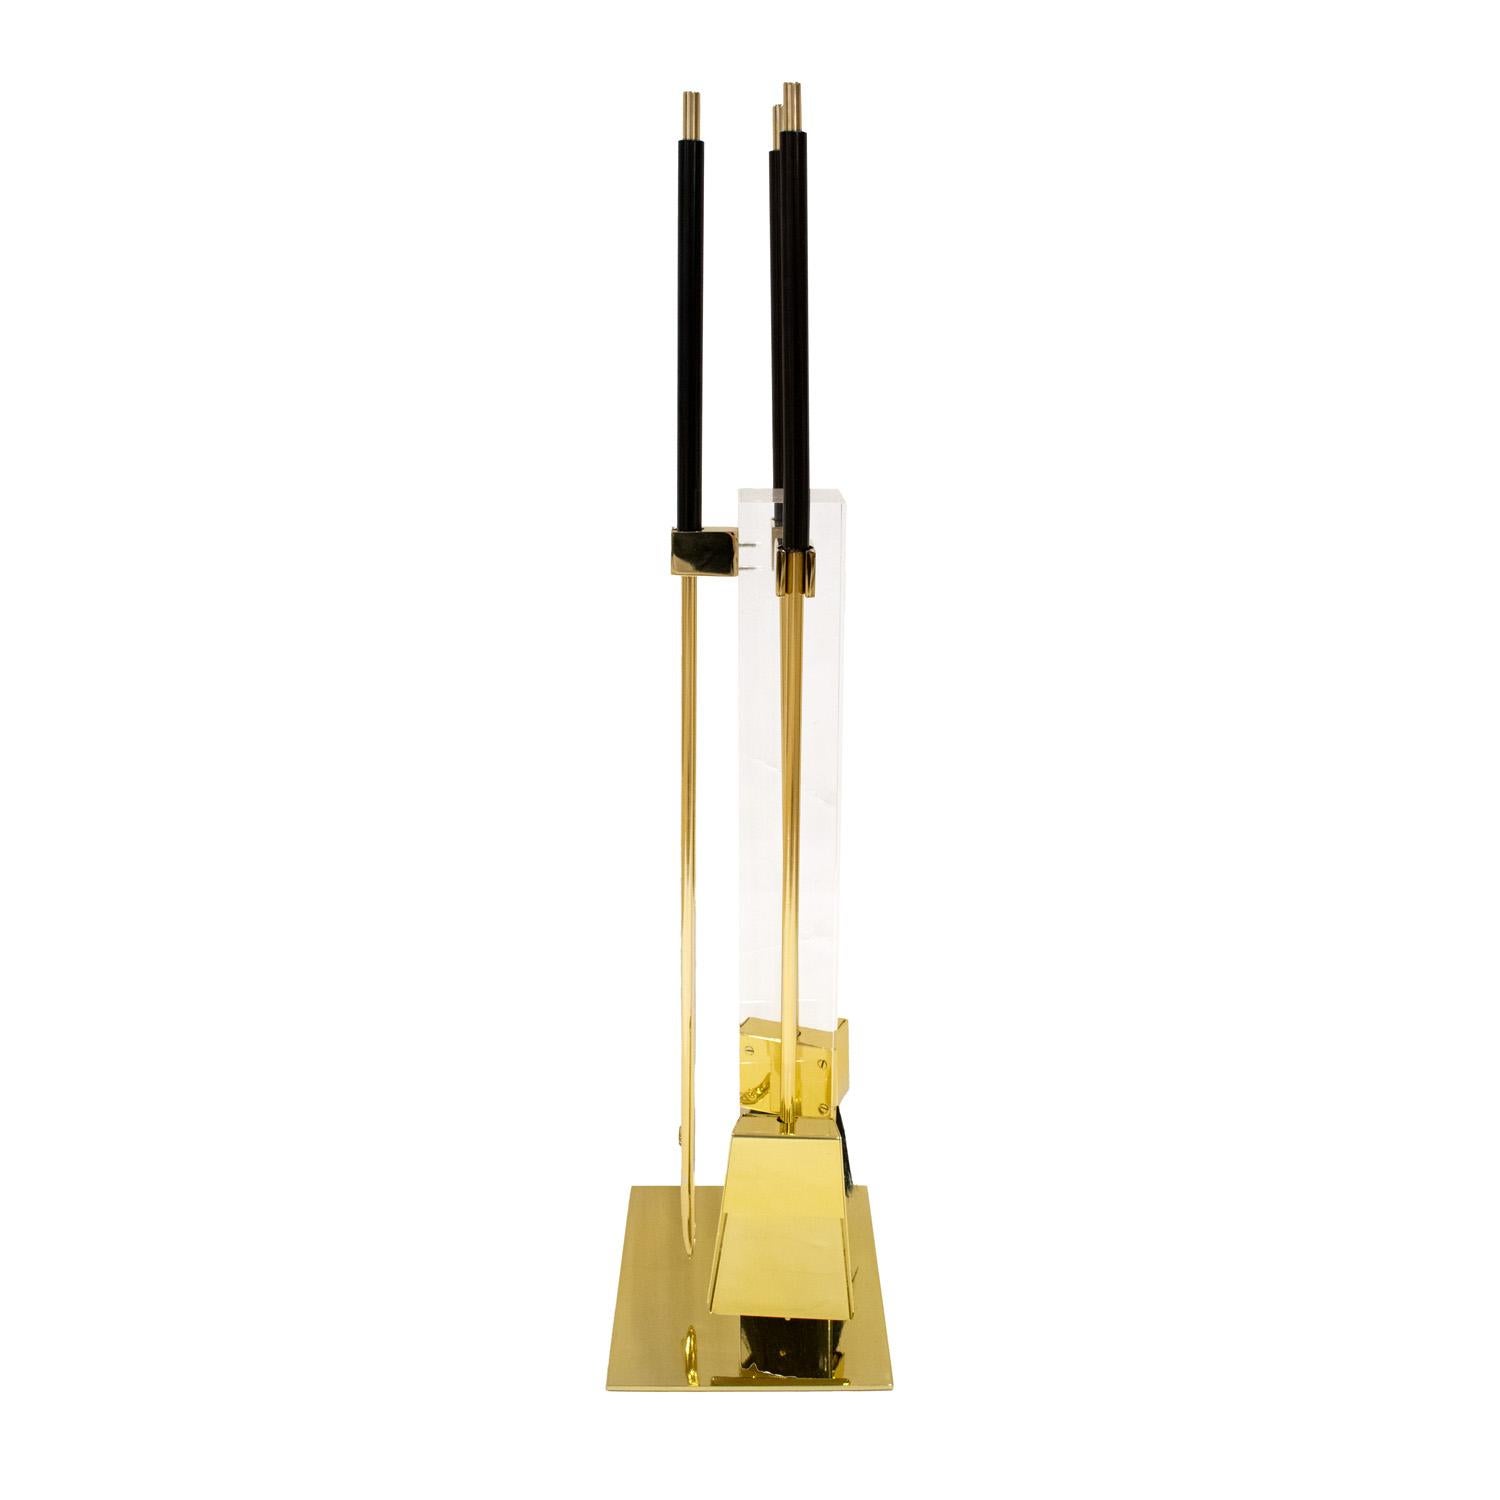 Modern Danny Alessandro Fireplace Tool Set in Lucite and Brass 1980s